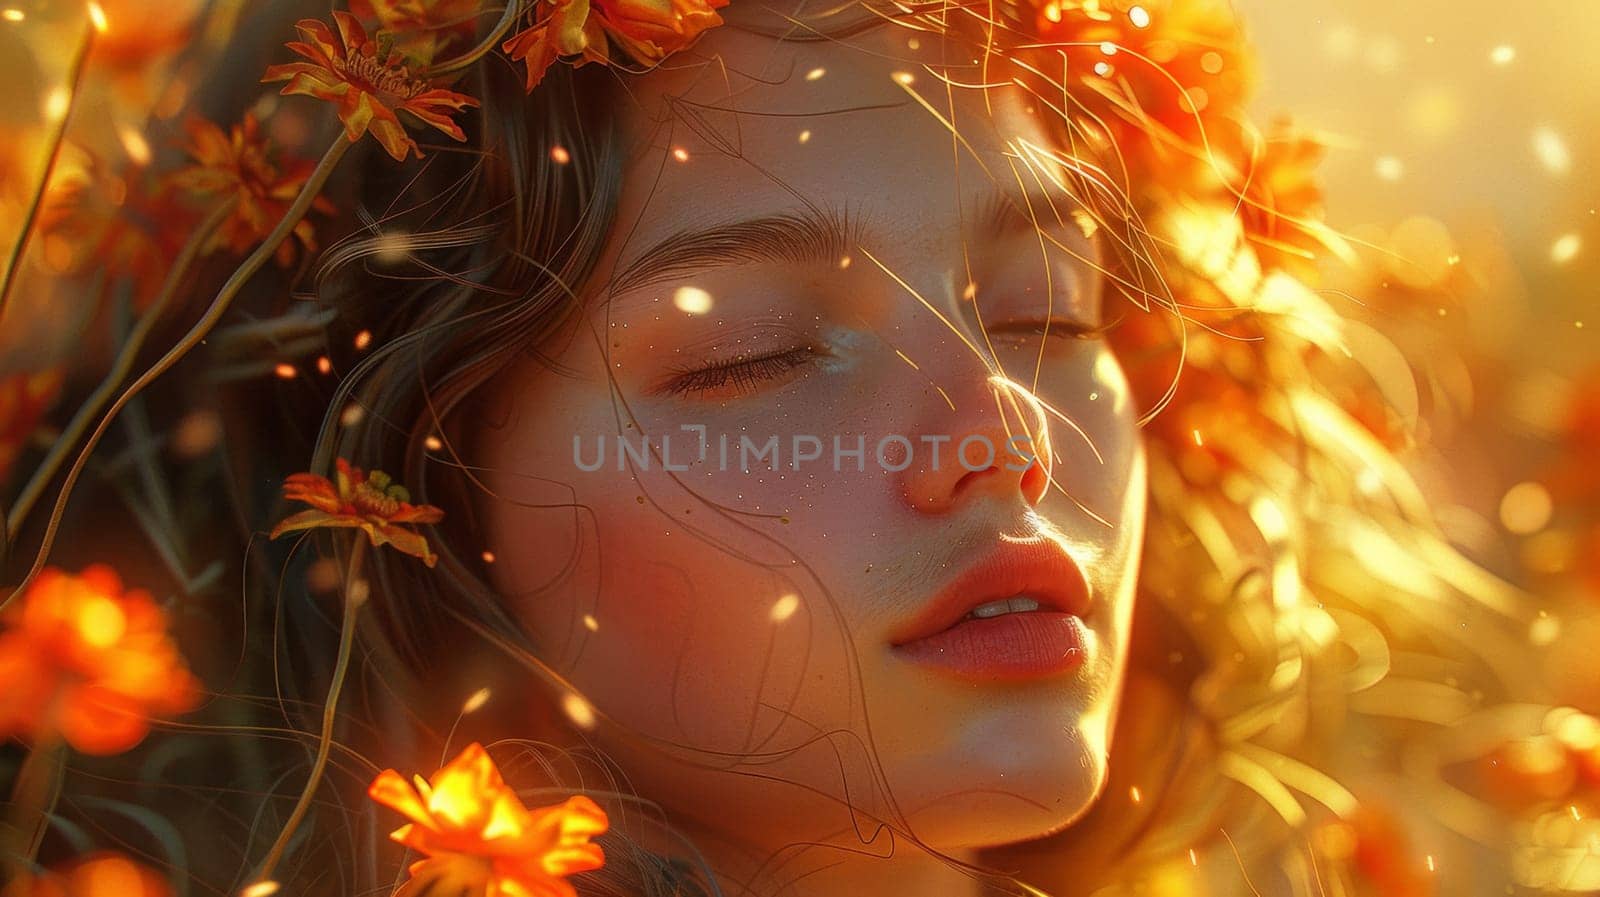 A woman with her eyes closed surrounded by orange flowers